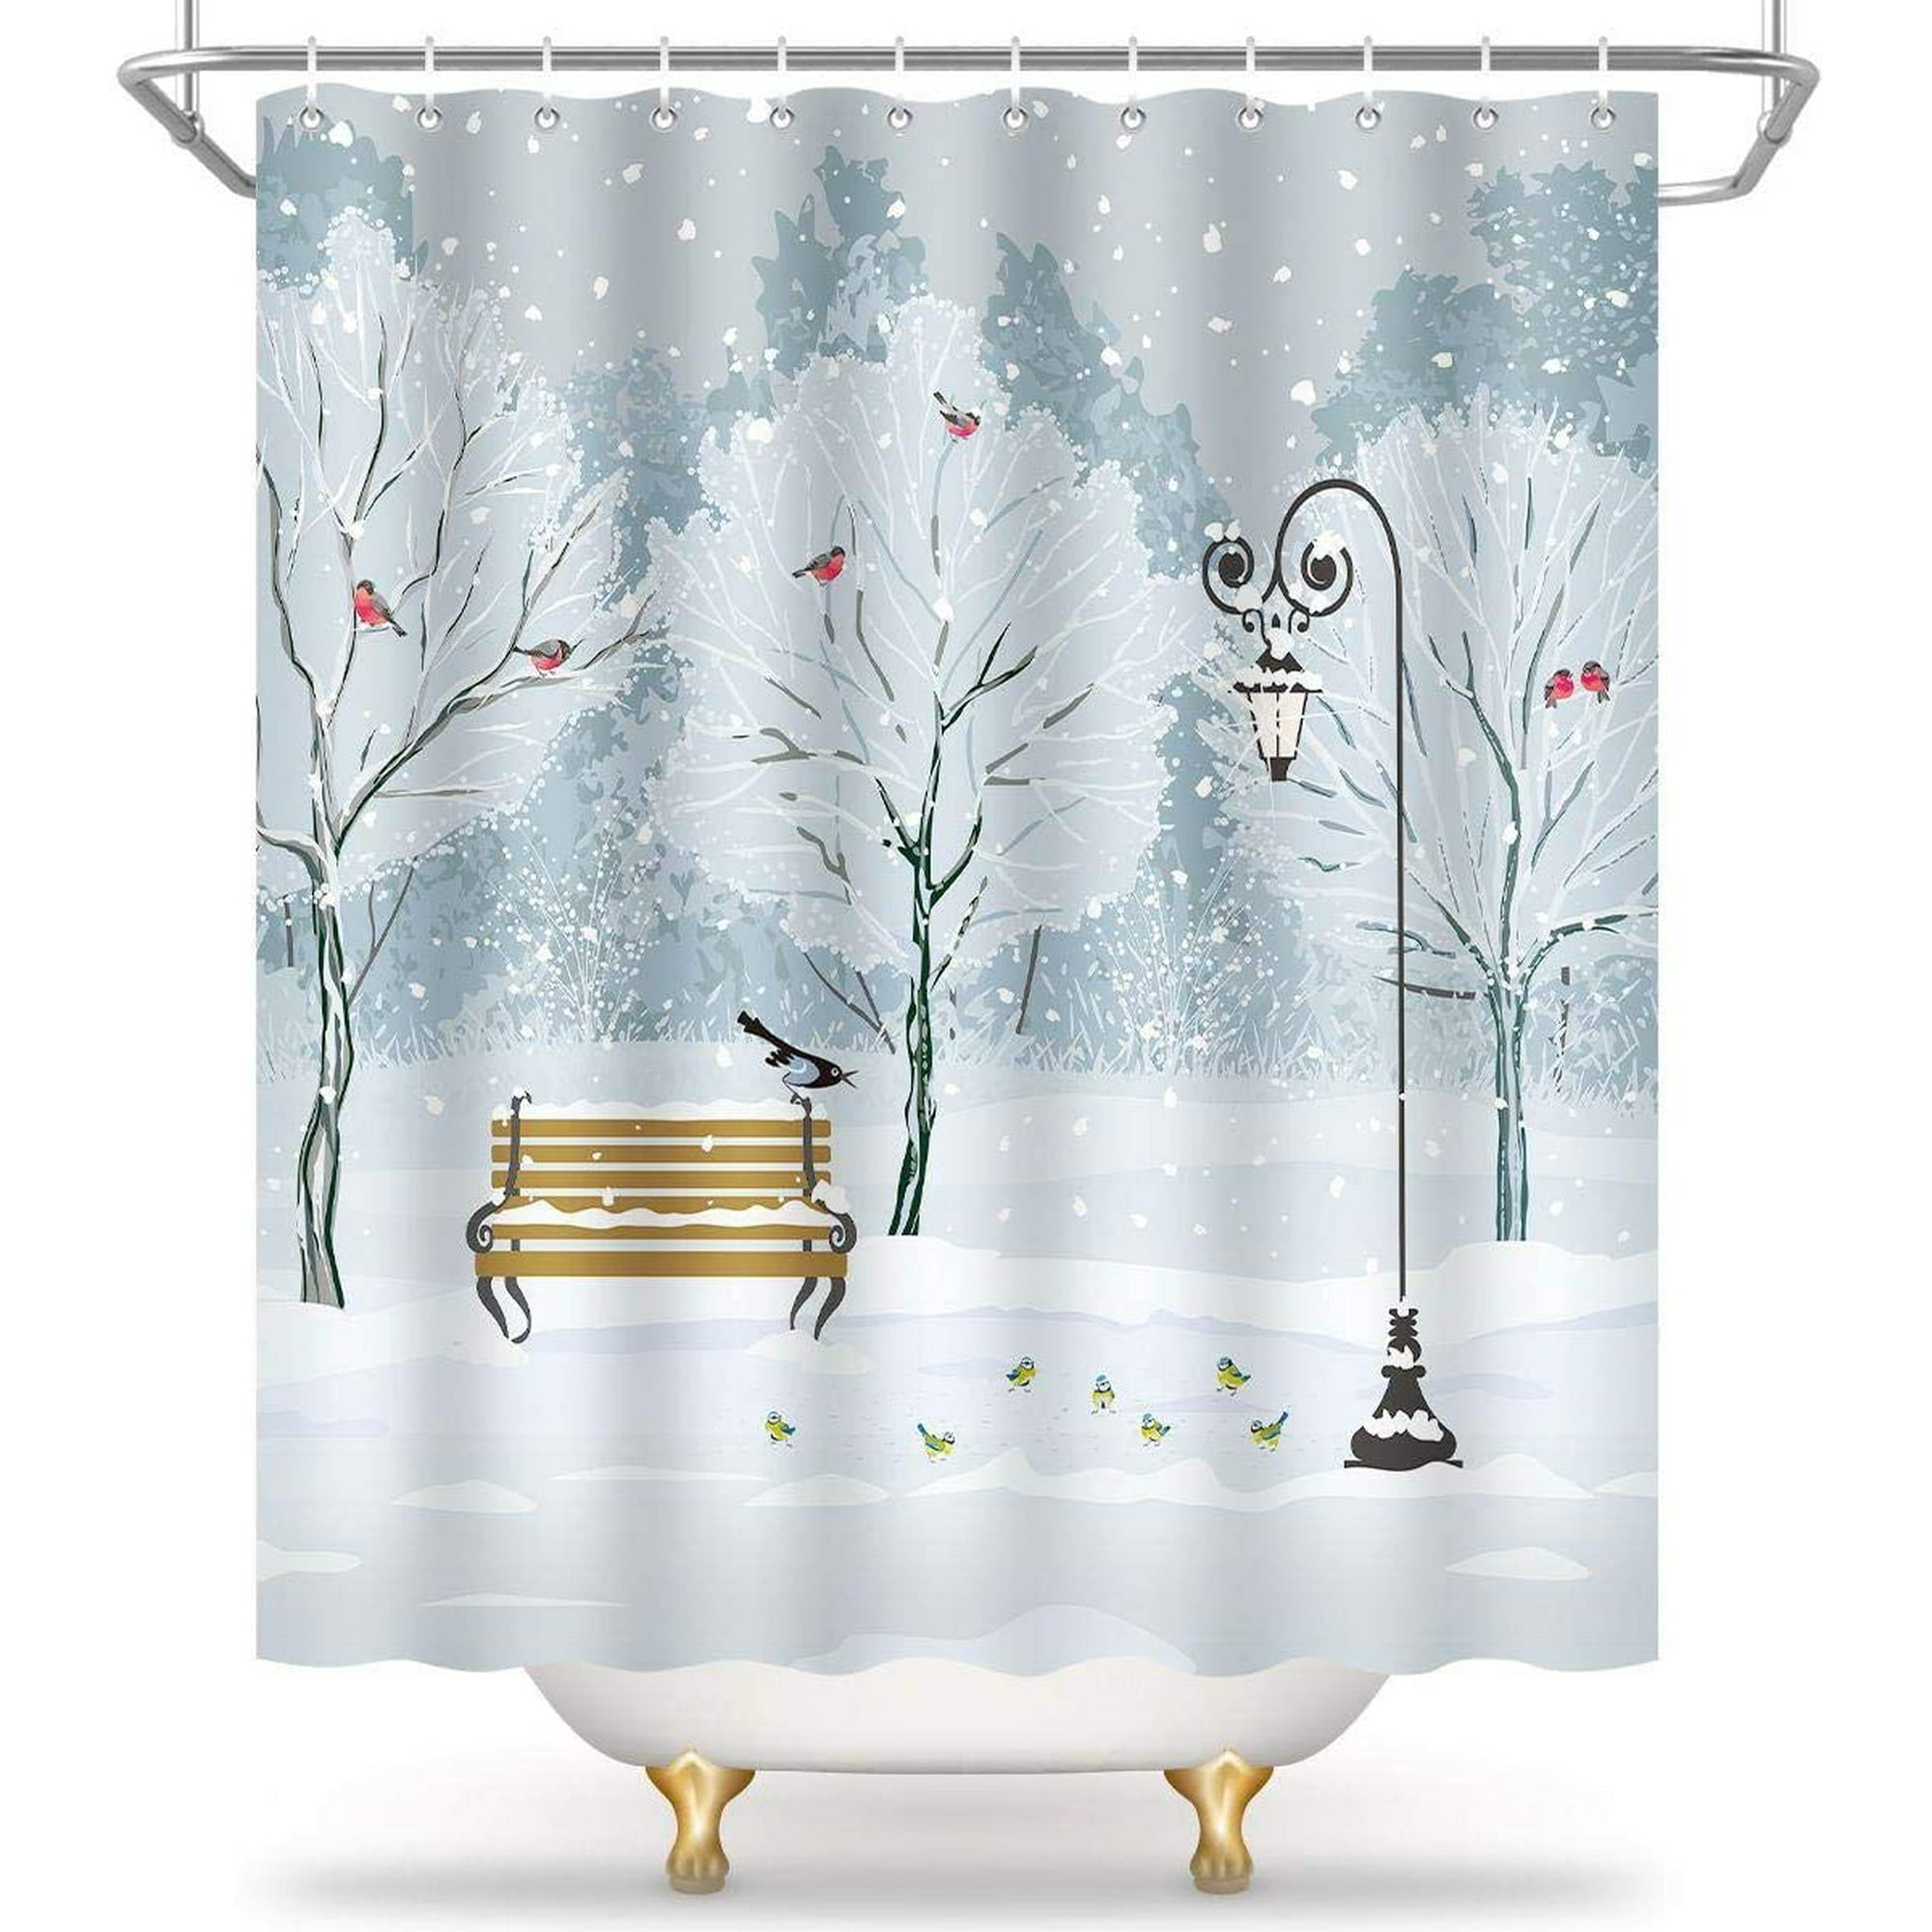 Weather Themed Fabric Shower Curtain, Park Shower Curtains